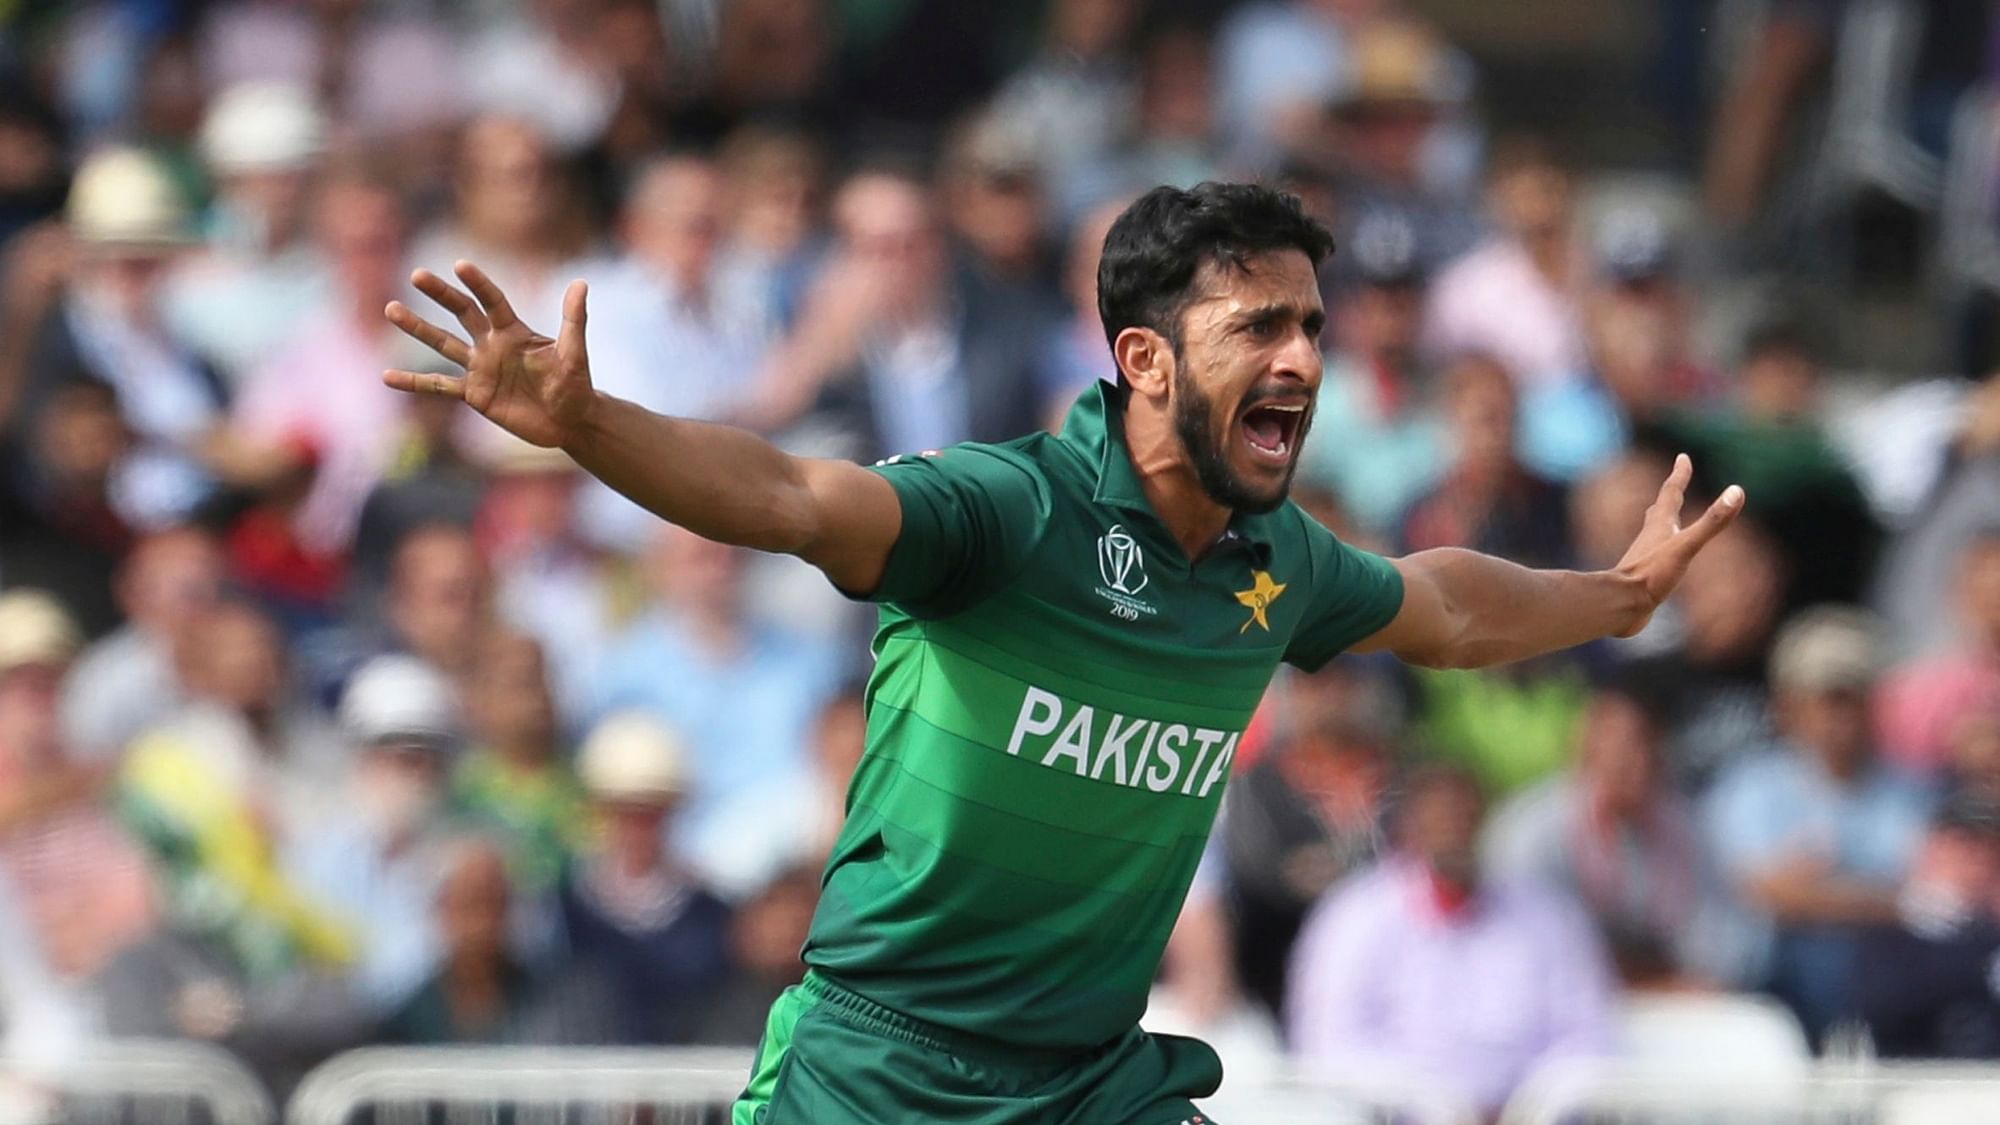 Pakistan pacer Hasan Ali said that he is tying the knot with Shamia Arzoo in Dubai on 20 August.